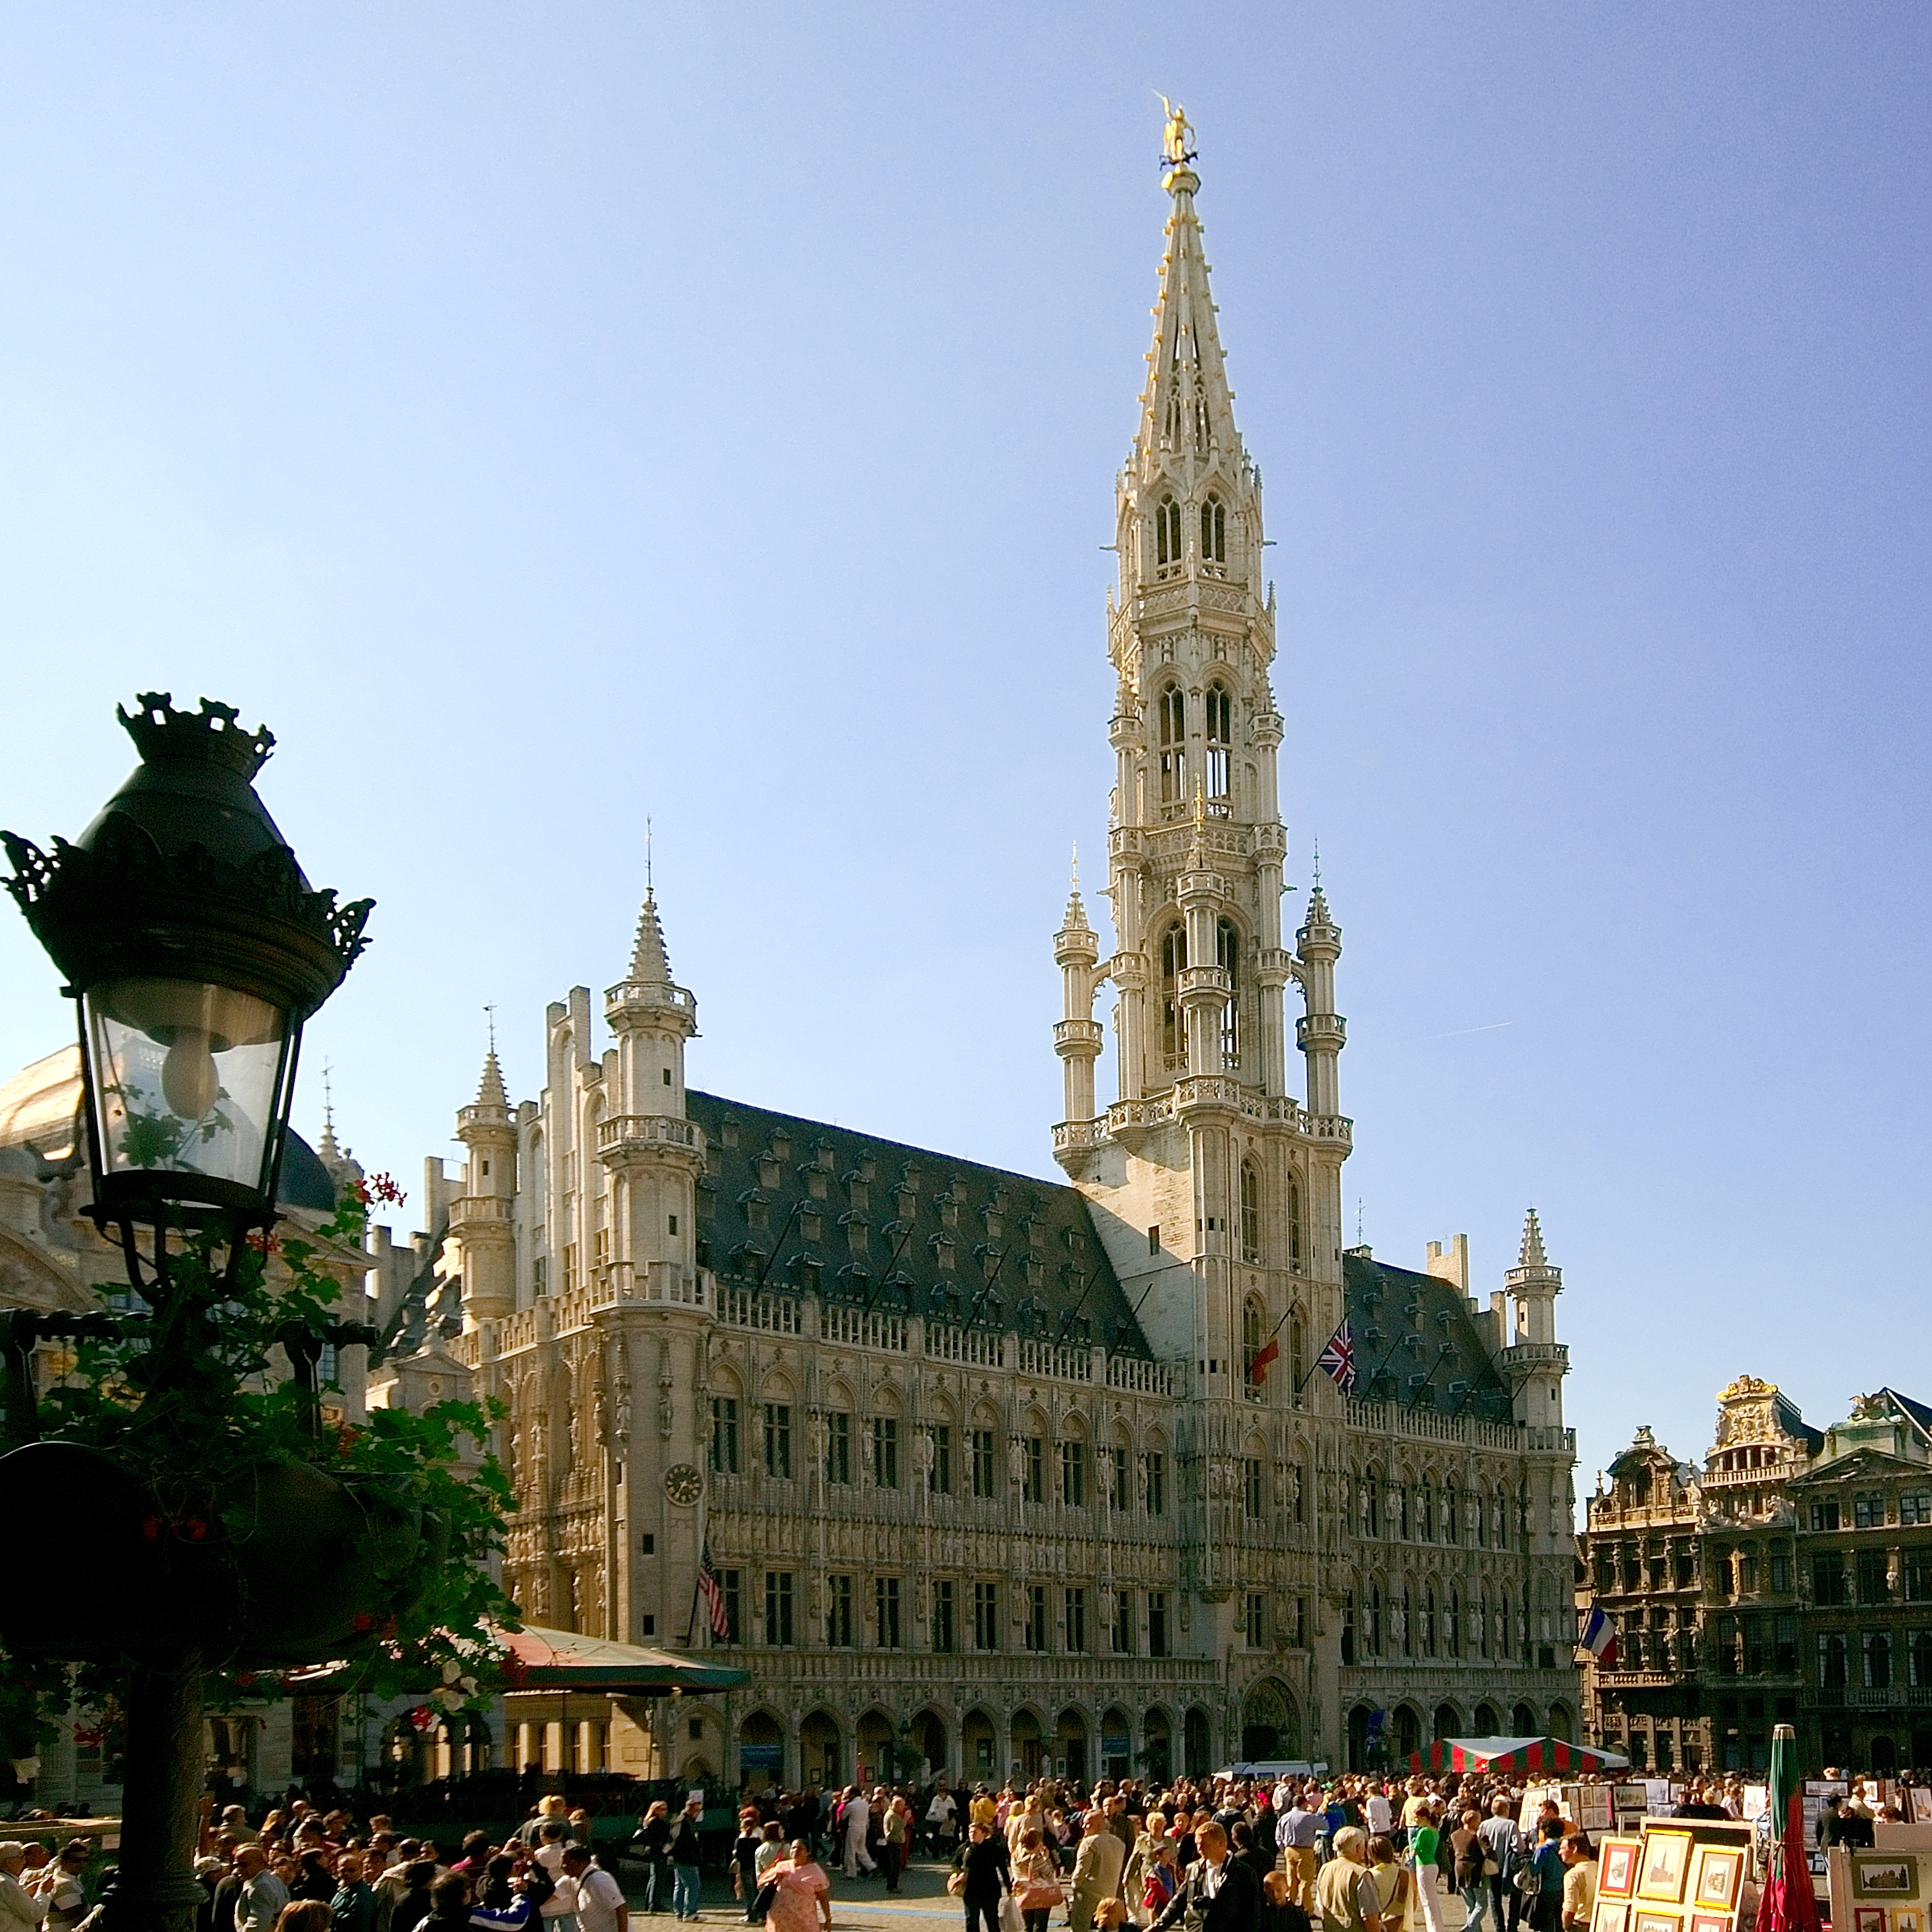 City of Brussels Town Hall